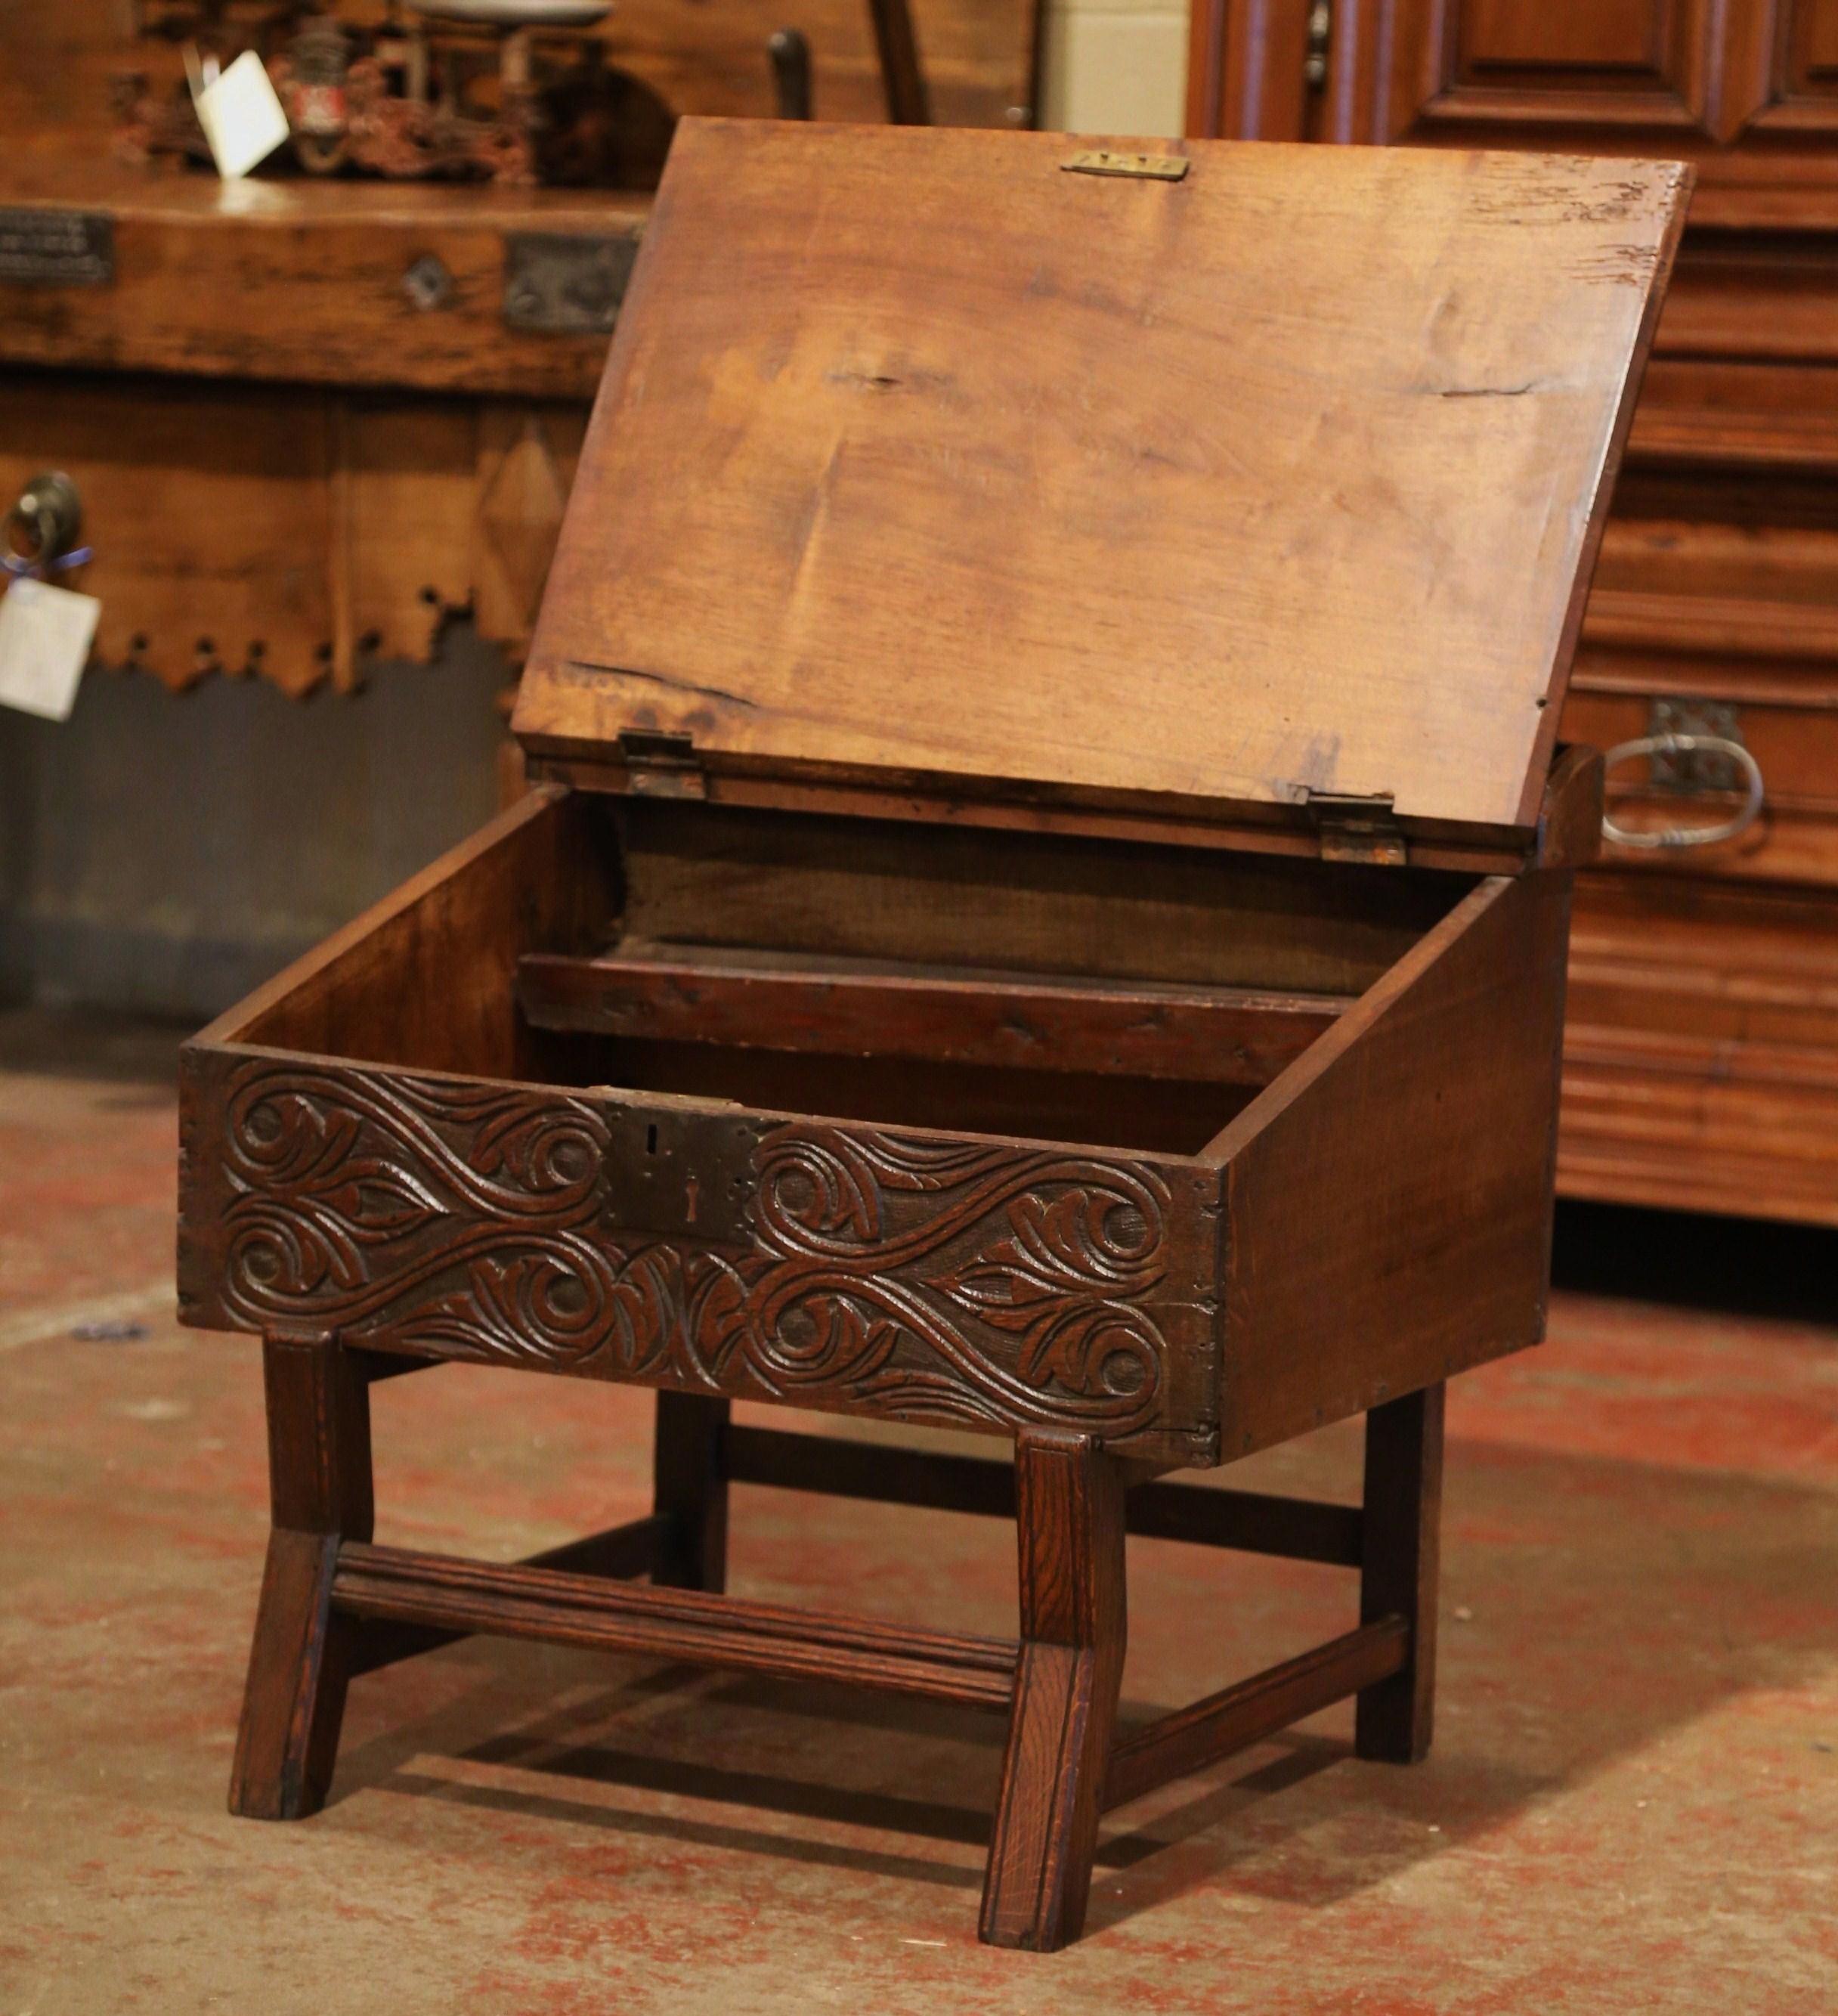 Louis XIV 18th Century French Carved Walnut Desk on Legs with Slant Top and Inside Storage For Sale